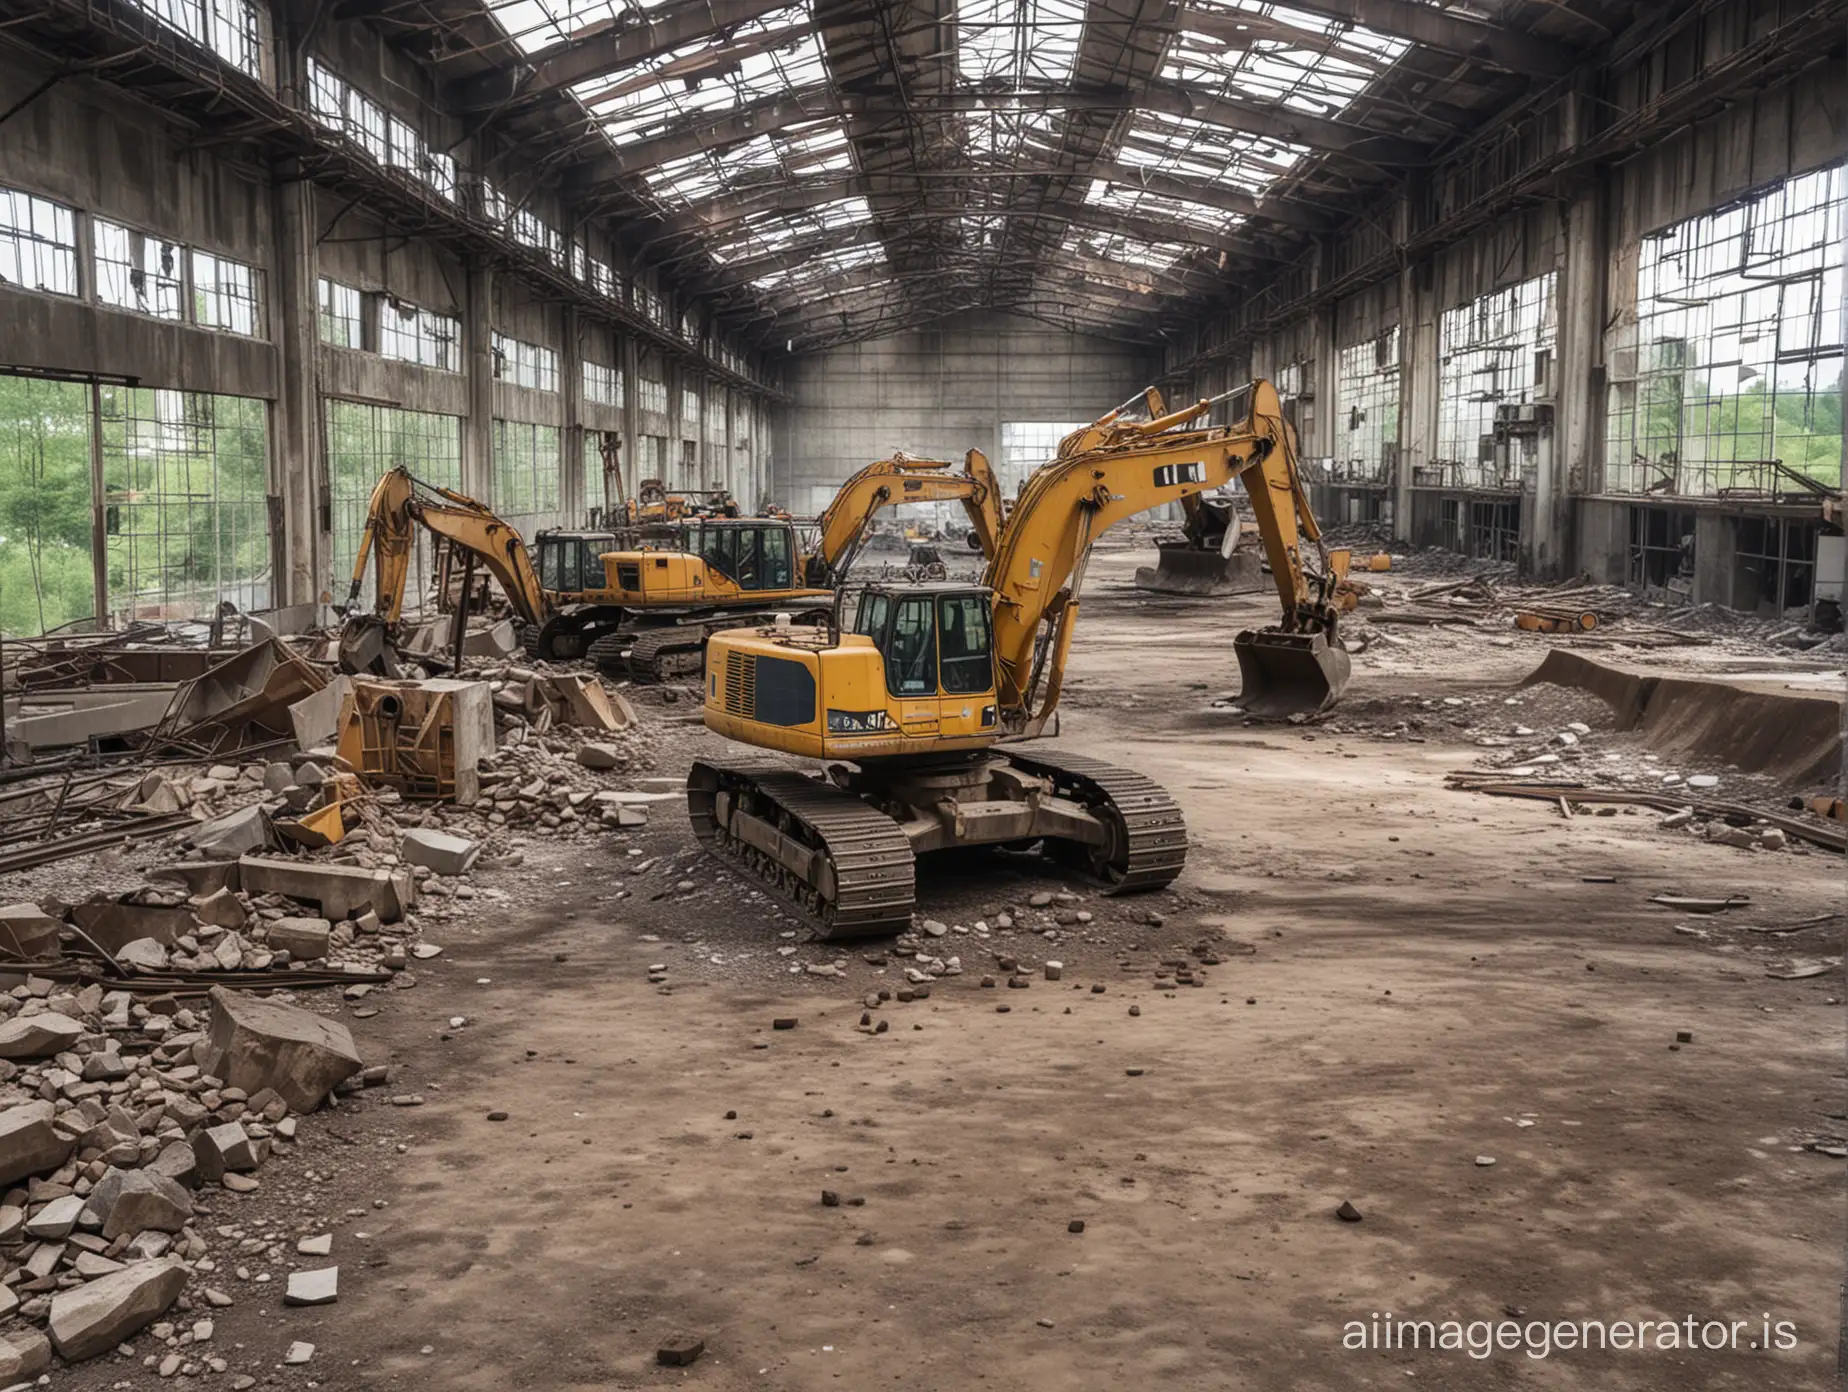 Giant-Quarry-Excavators-in-Abandoned-Factory